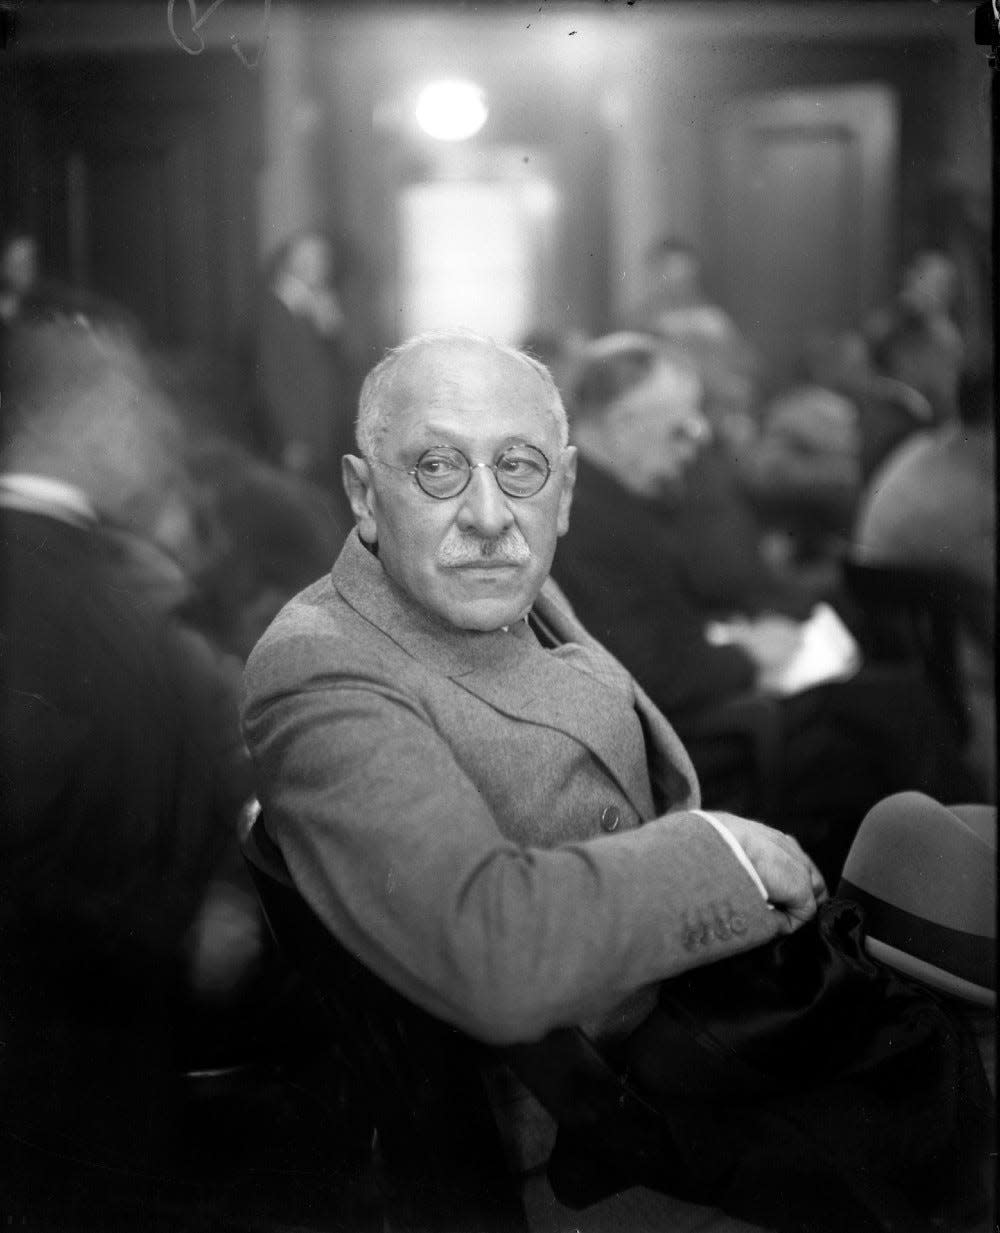 Julius Rosenwald, shown in 1926, was a Chicago businessman and philanthropist. He is best known as the part-owner of Sears, Roebuck & Co. and for starting the Rosenwald Fund, which donated millions to educate African-American children. (Chicago Tribune historical photo/TNS)